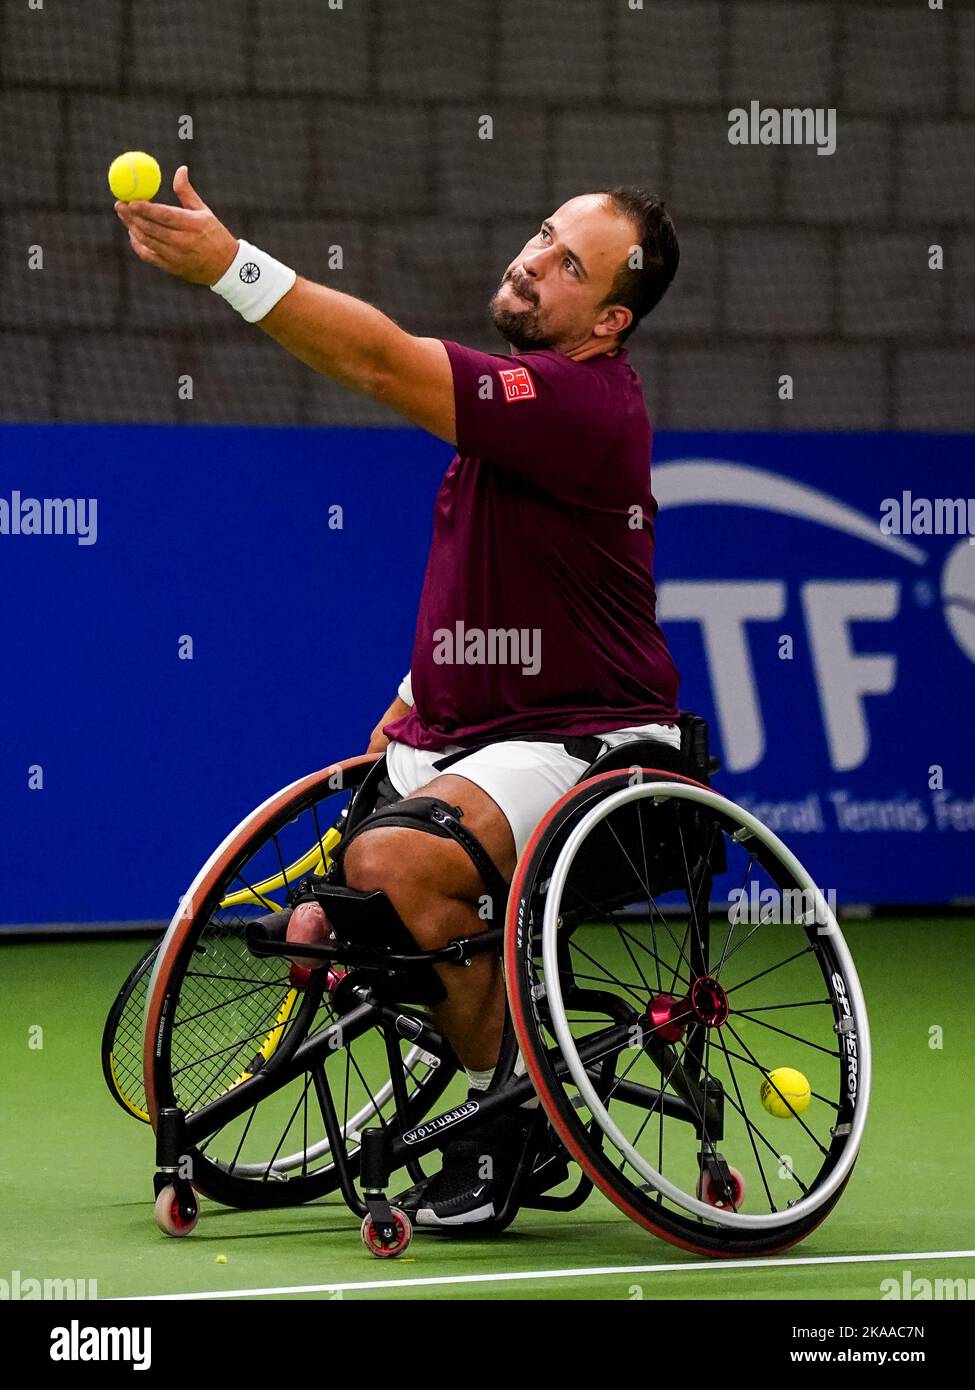 OSS, NETHERLANDS - NOVEMBER 1: Tom Egberink of the Netherlands serves in his match against Shingo Kunieda of Japan during Day 3 of the 2022 ITF Wheelchair Tennis Masters at Sportcentrum de Rusheuvel on November 1, 2022 in Oss, Netherlands (Photo by Rene Nijhuis/Orange Pictures) Stock Photo